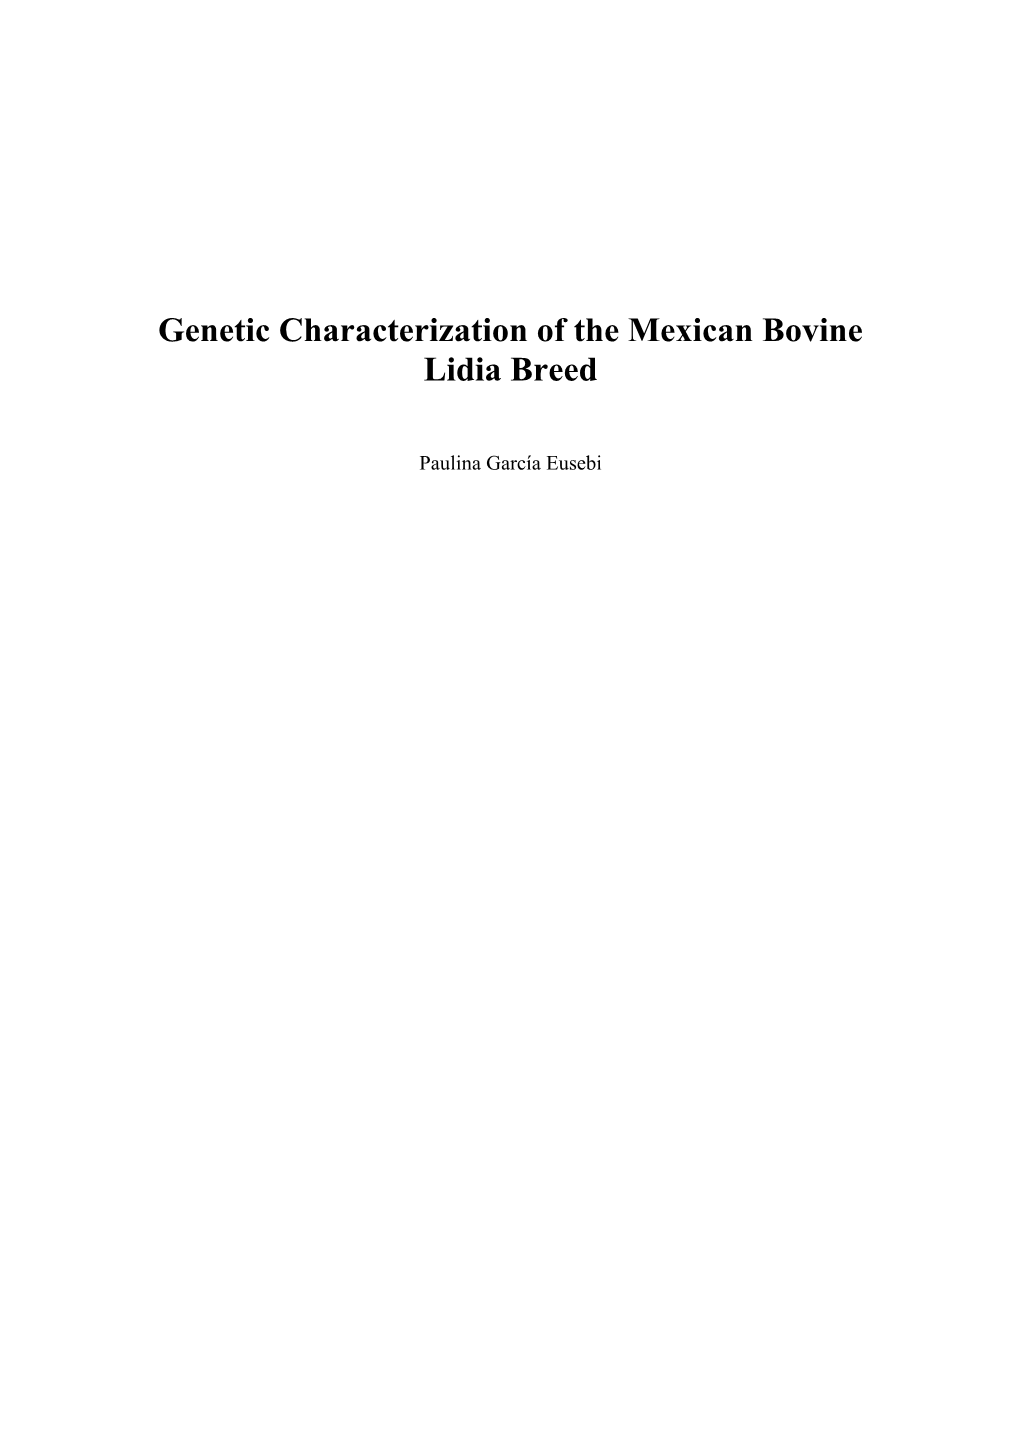 Genetic Characterization of the Mexican Bovine Lidia Breed